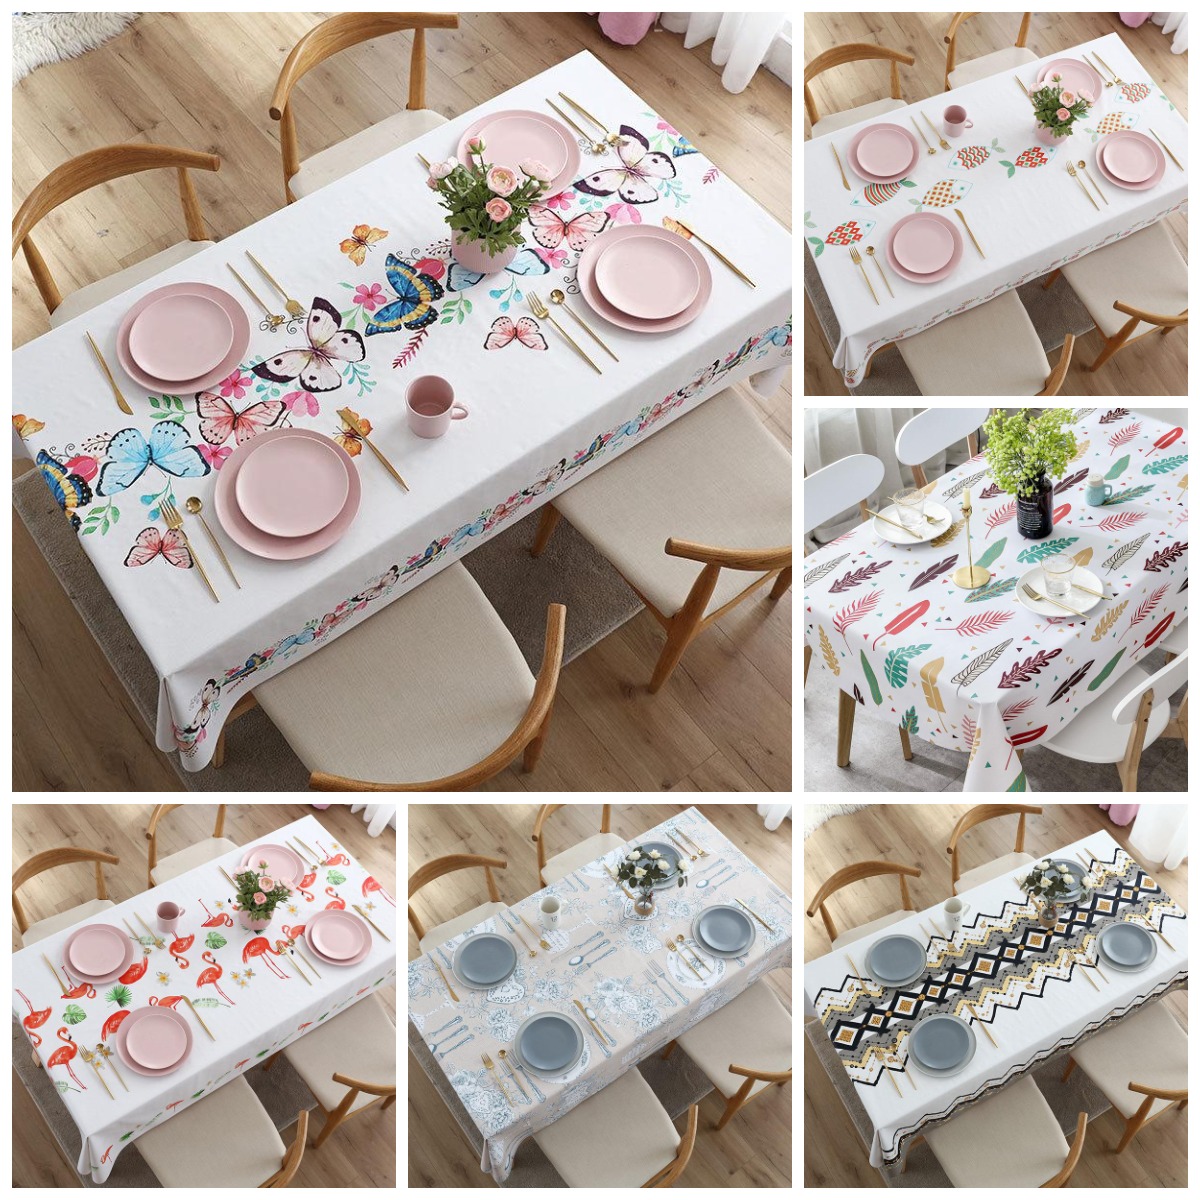 Nordic Table runner tablecloths waterproof and oil-proof disposable PVC coffee Table Cloth rectangular table outdoor picnic non-slip mat